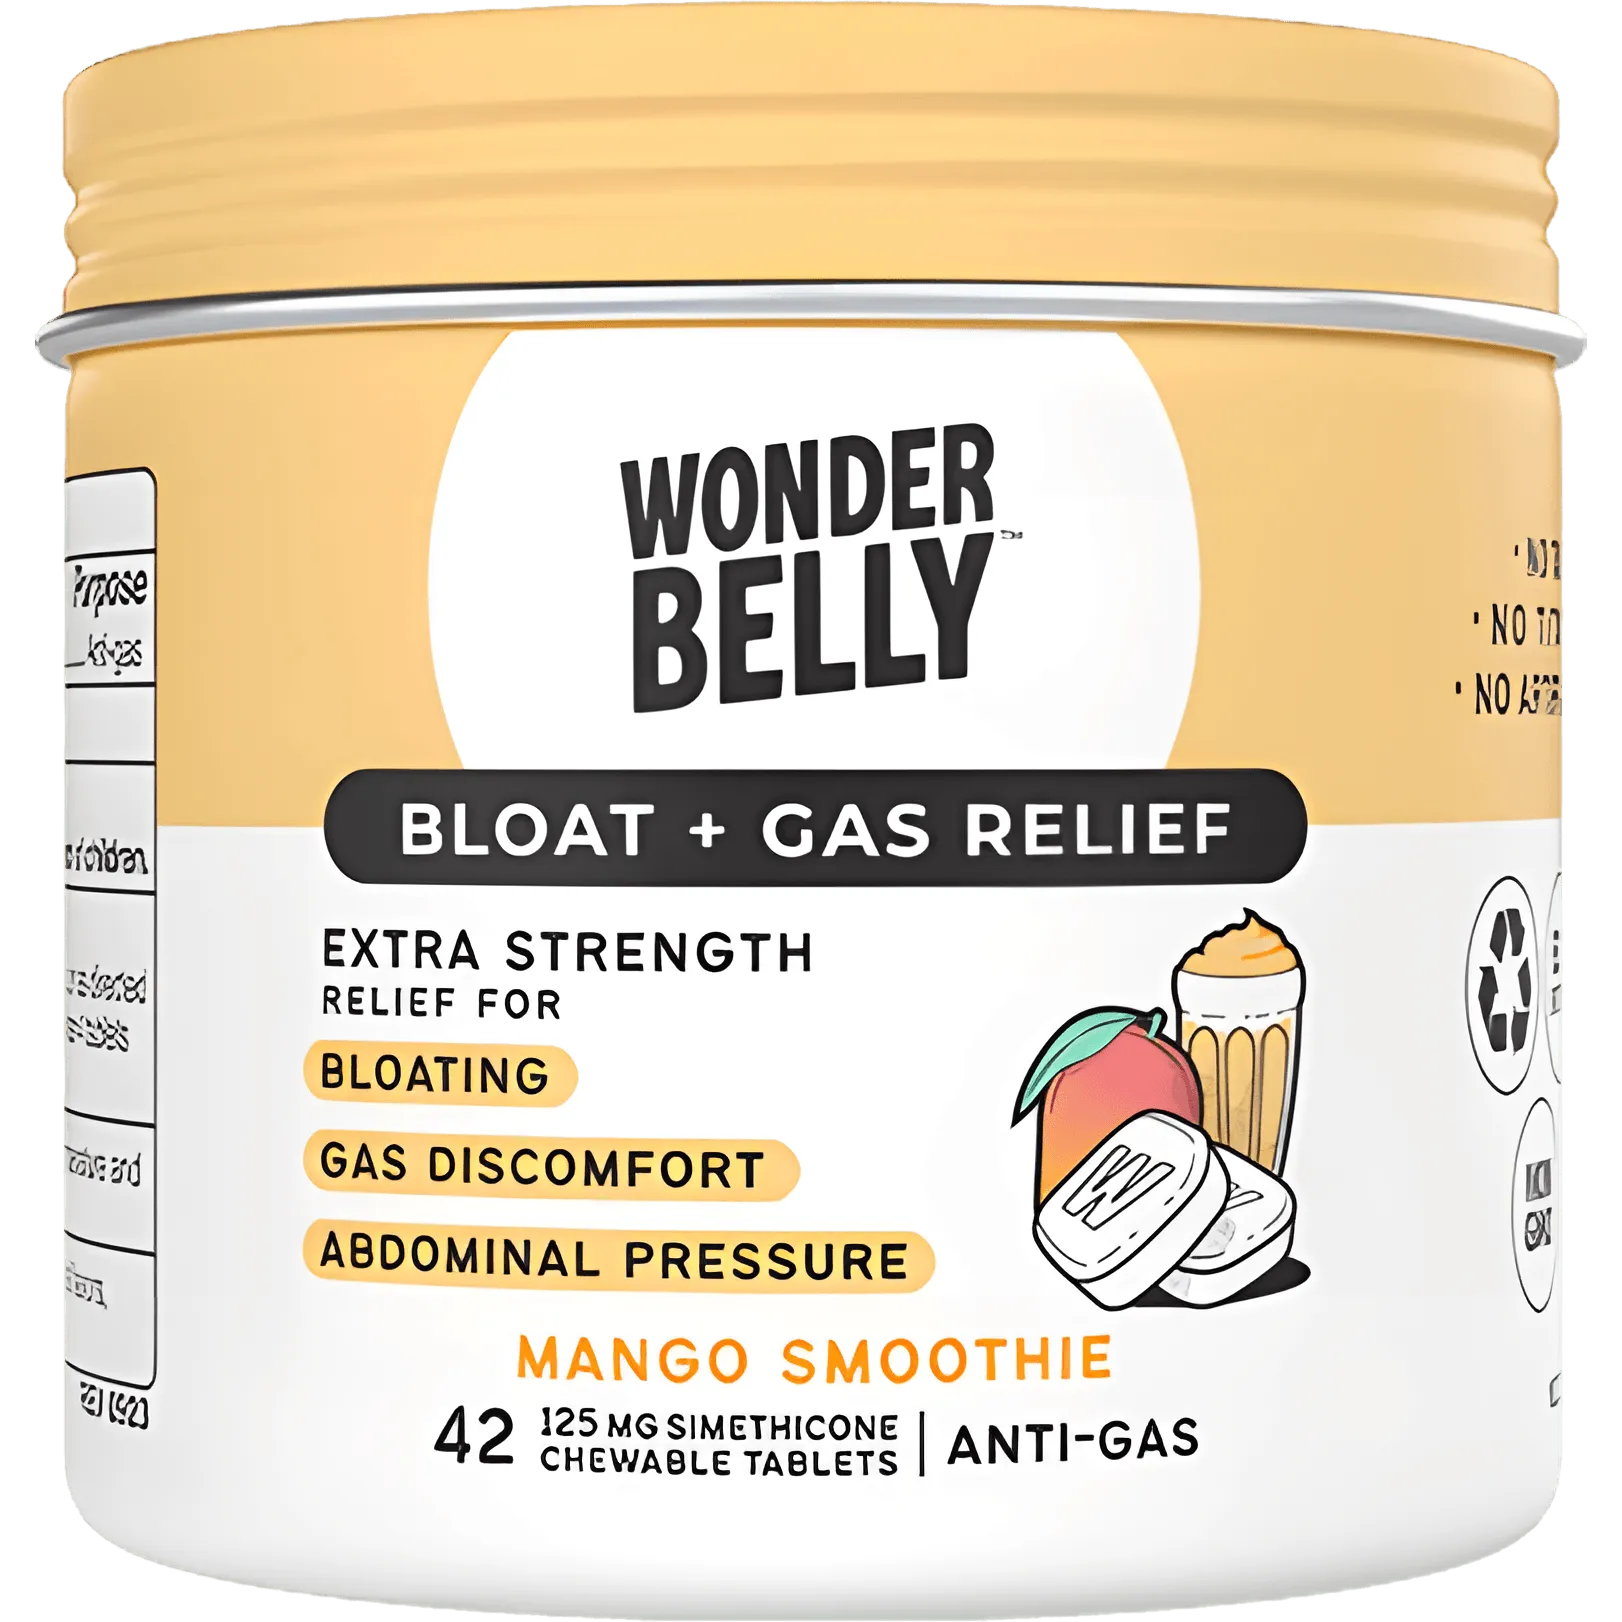 Free Wonderbelly Bloat+Gas Relief Tablets